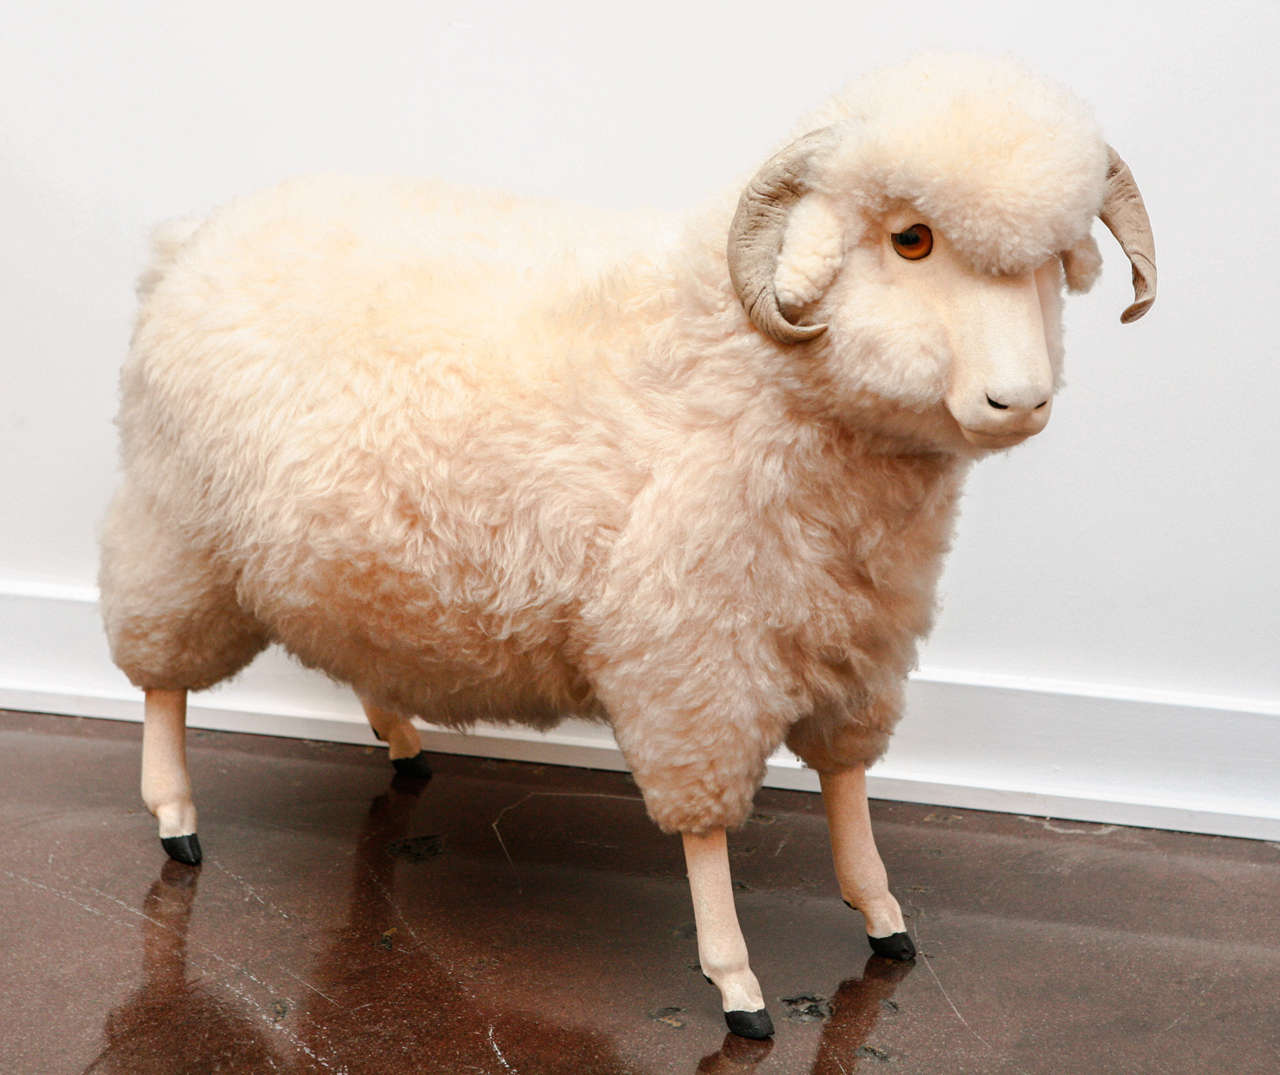 Wonderful vintage life sized sheep, with a thick coat of wool.  Circa 1970's, with glass eyes, wooden legs and horns, and a soft felt covered face.